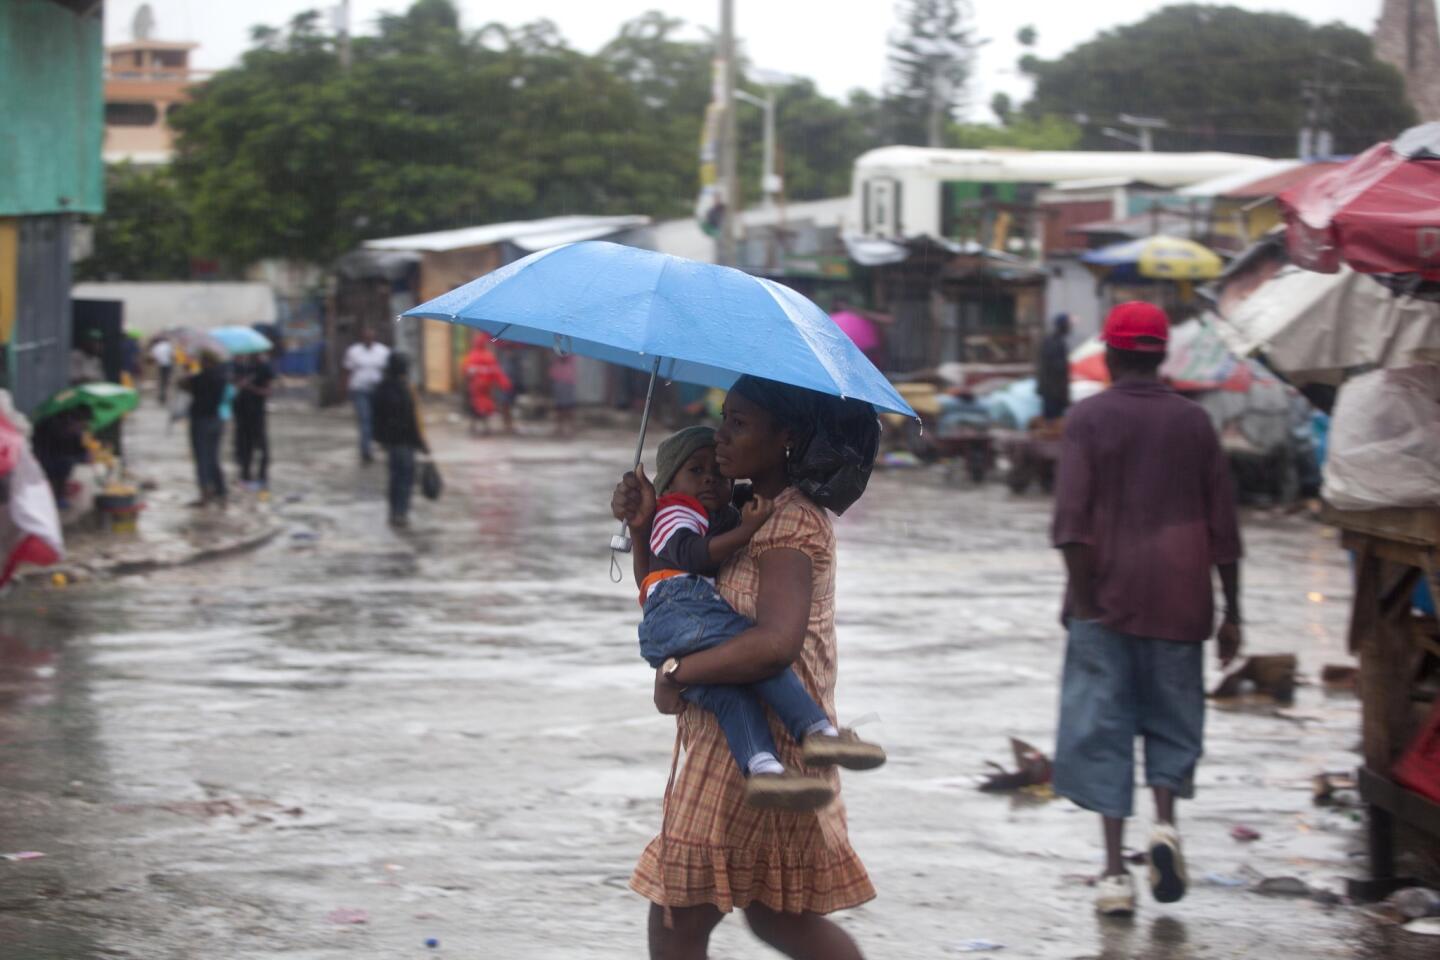 A woman carrying a child walks in the rain triggered by Hurricane Matthew in Port-au-Prince, Haiti, on Oct. 4, 2016.